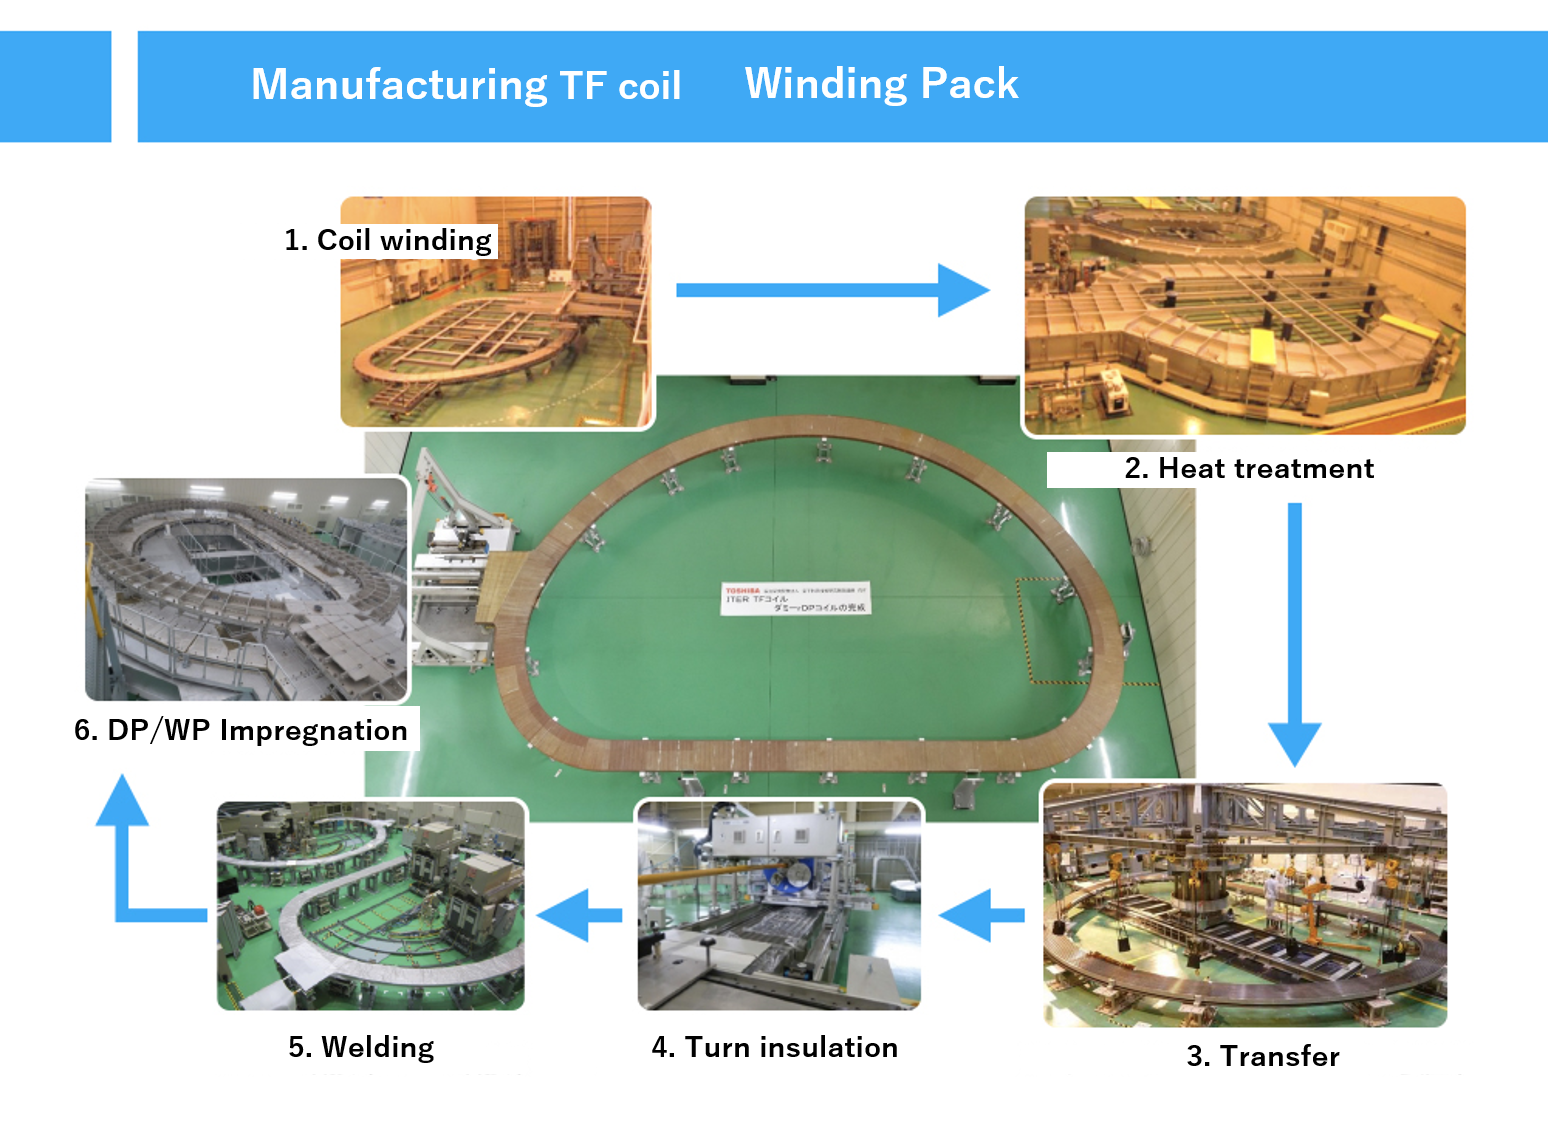 TF coil structure and manufacturing process